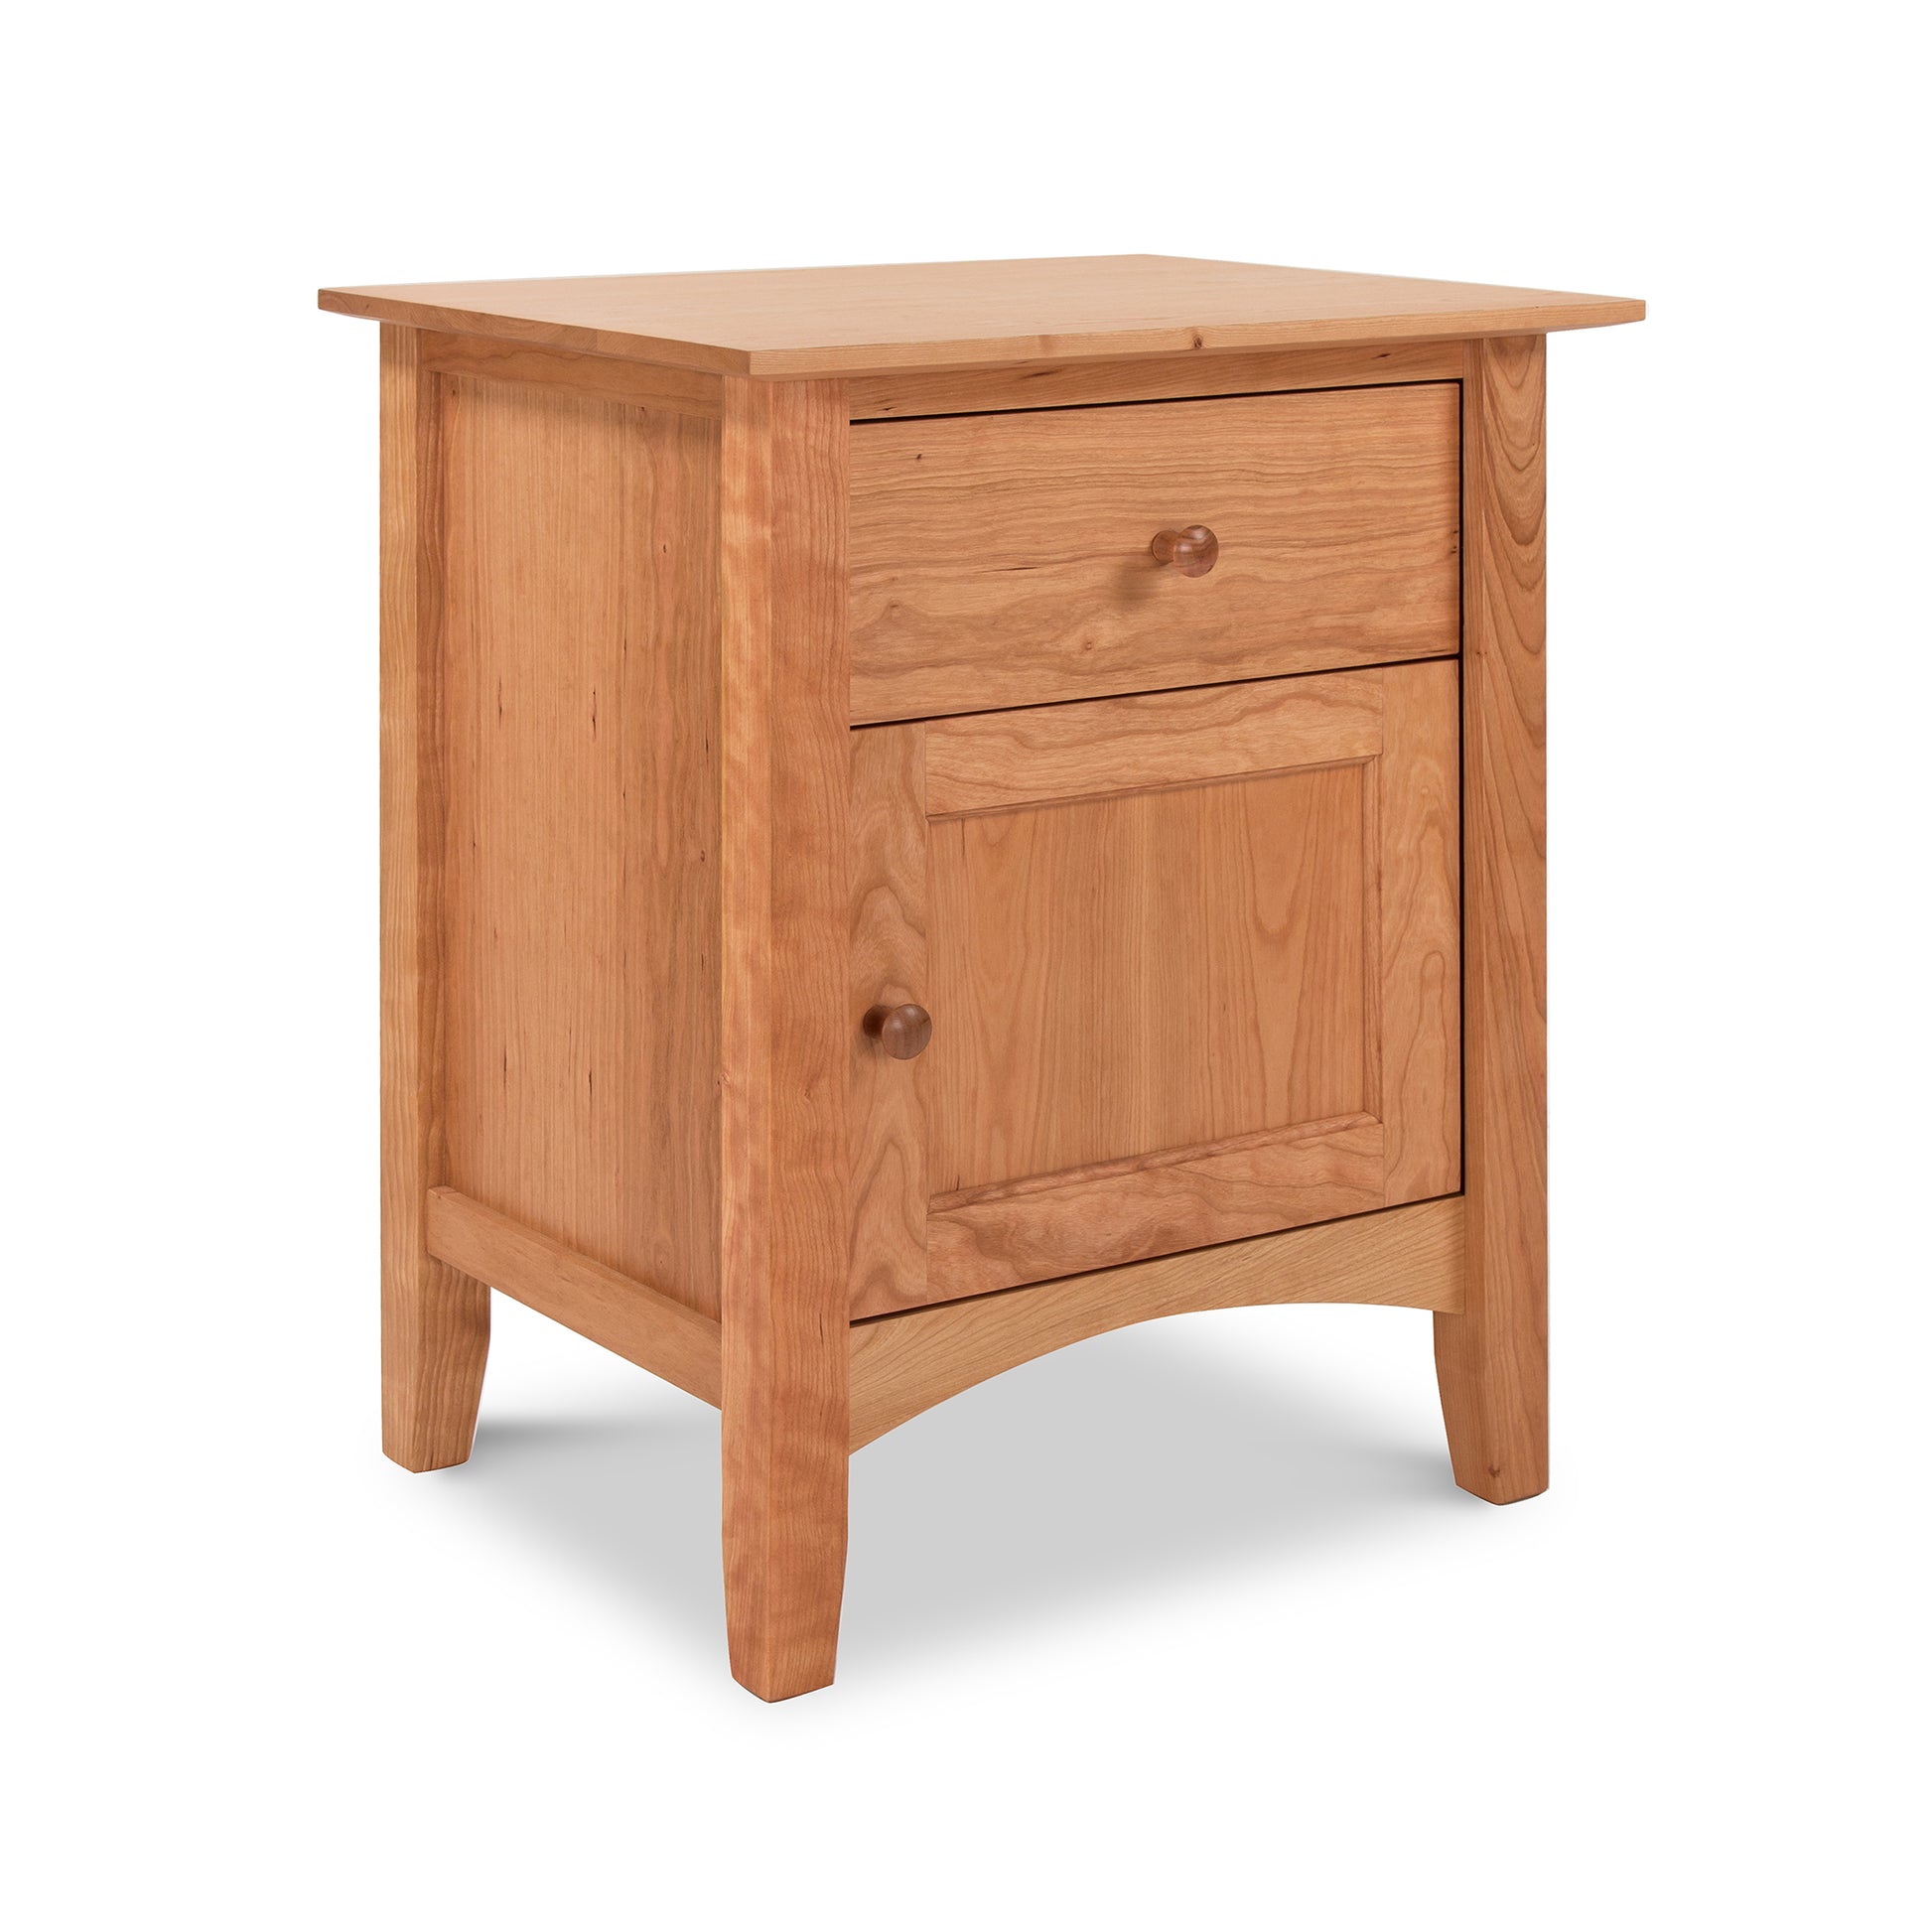 A Maple Corner Woodworks American Shaker 1-Drawer Nightstand with Door, showcasing Vermont craftsmanship and made from natural cherry wood.